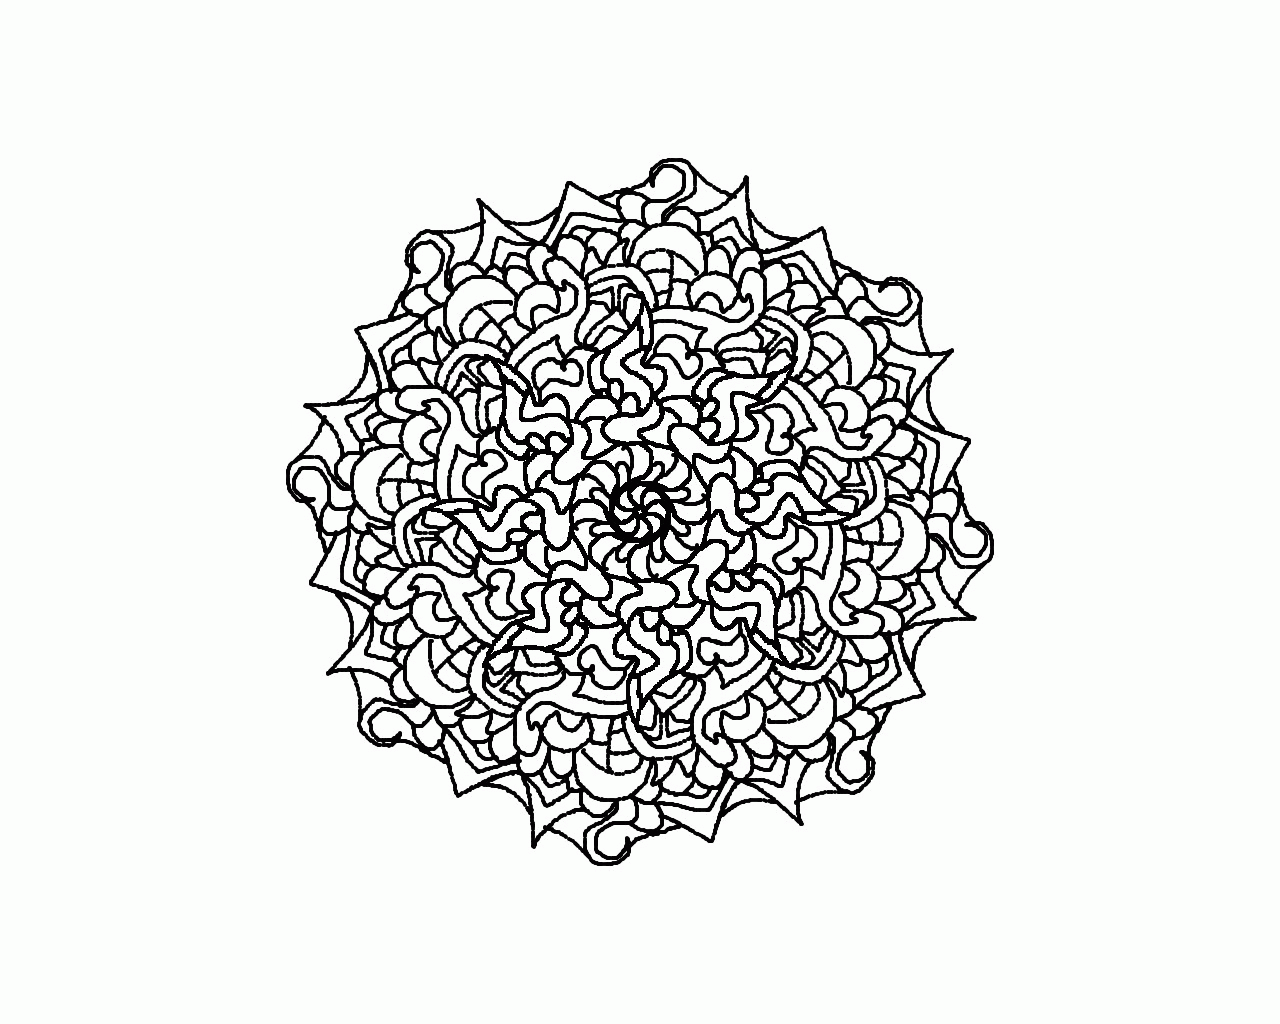 super-hard-abstract-coloring-pages-for-adults-3.jpg